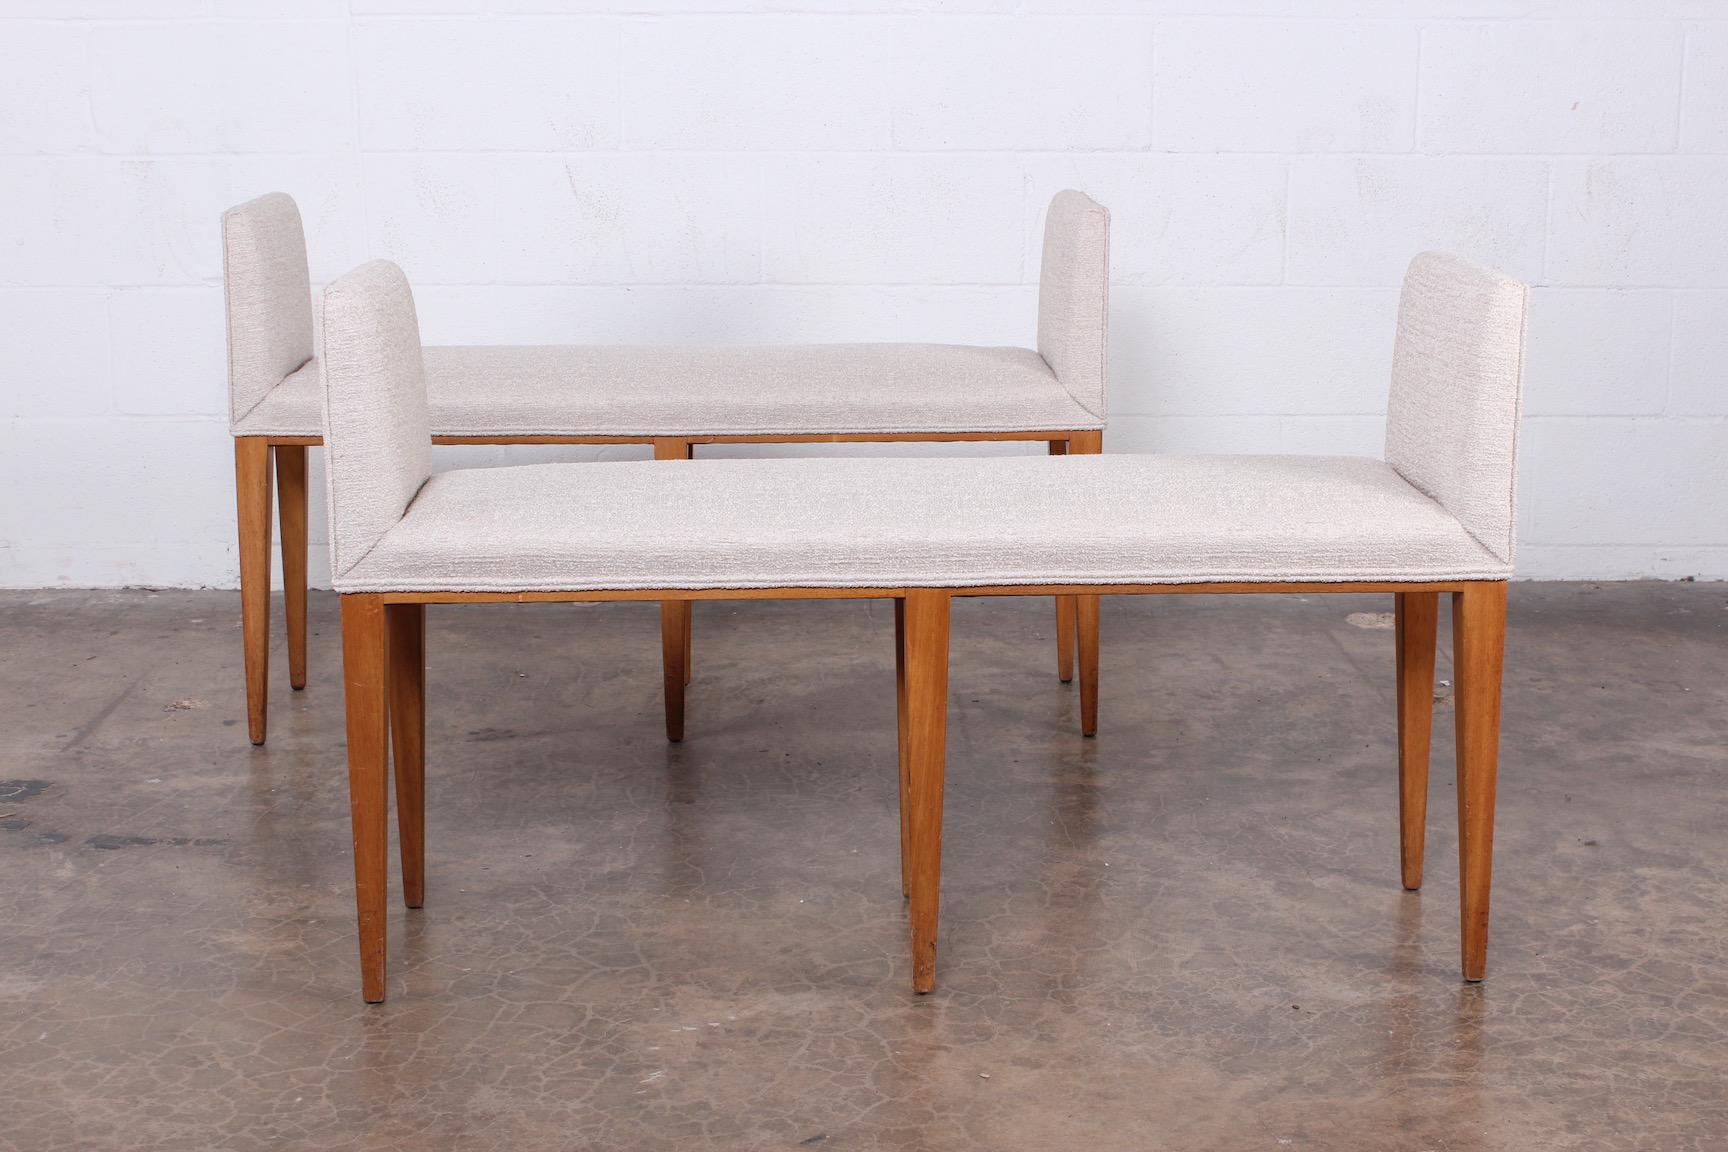 A matching pair of bleached mahogany benches by Edward Wormley for Dunbar.